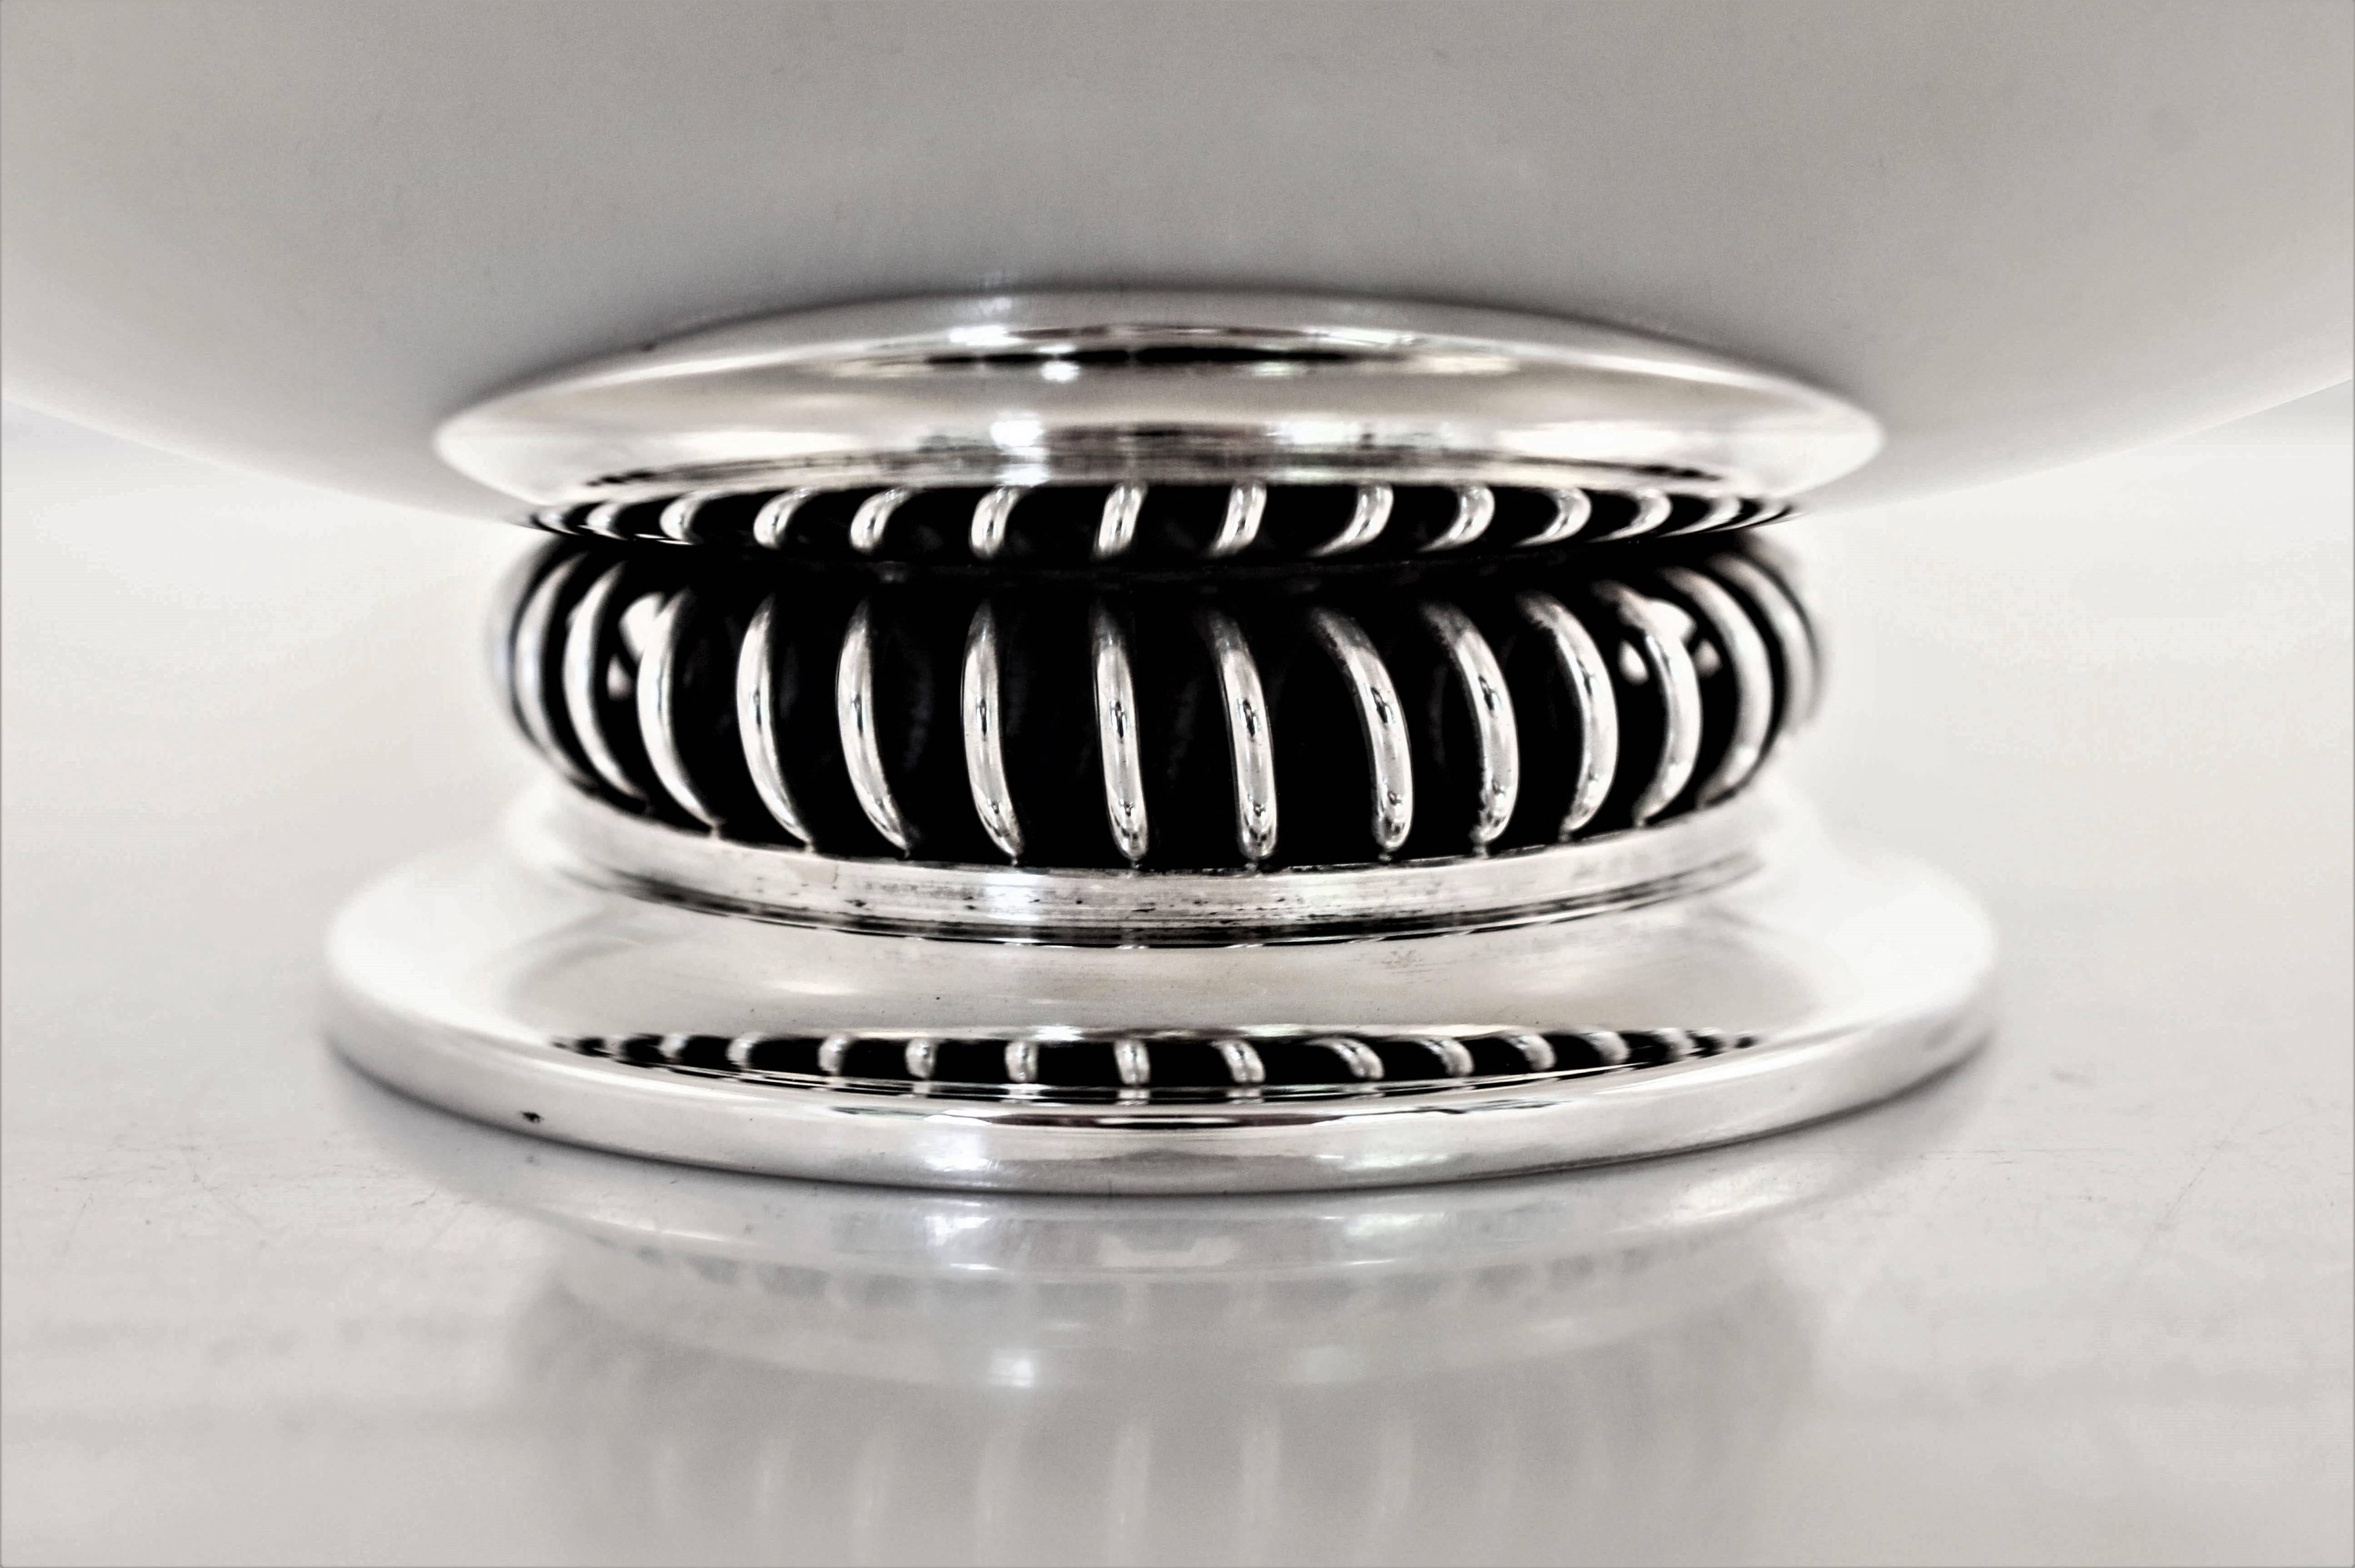 Danish silversmiths are known for their uber-modern hollowware and here’s an example. There are no decorations or designs on this piece, it has a clean top. The only detail it does have is the coil-like design around the pedestal (not weighted).